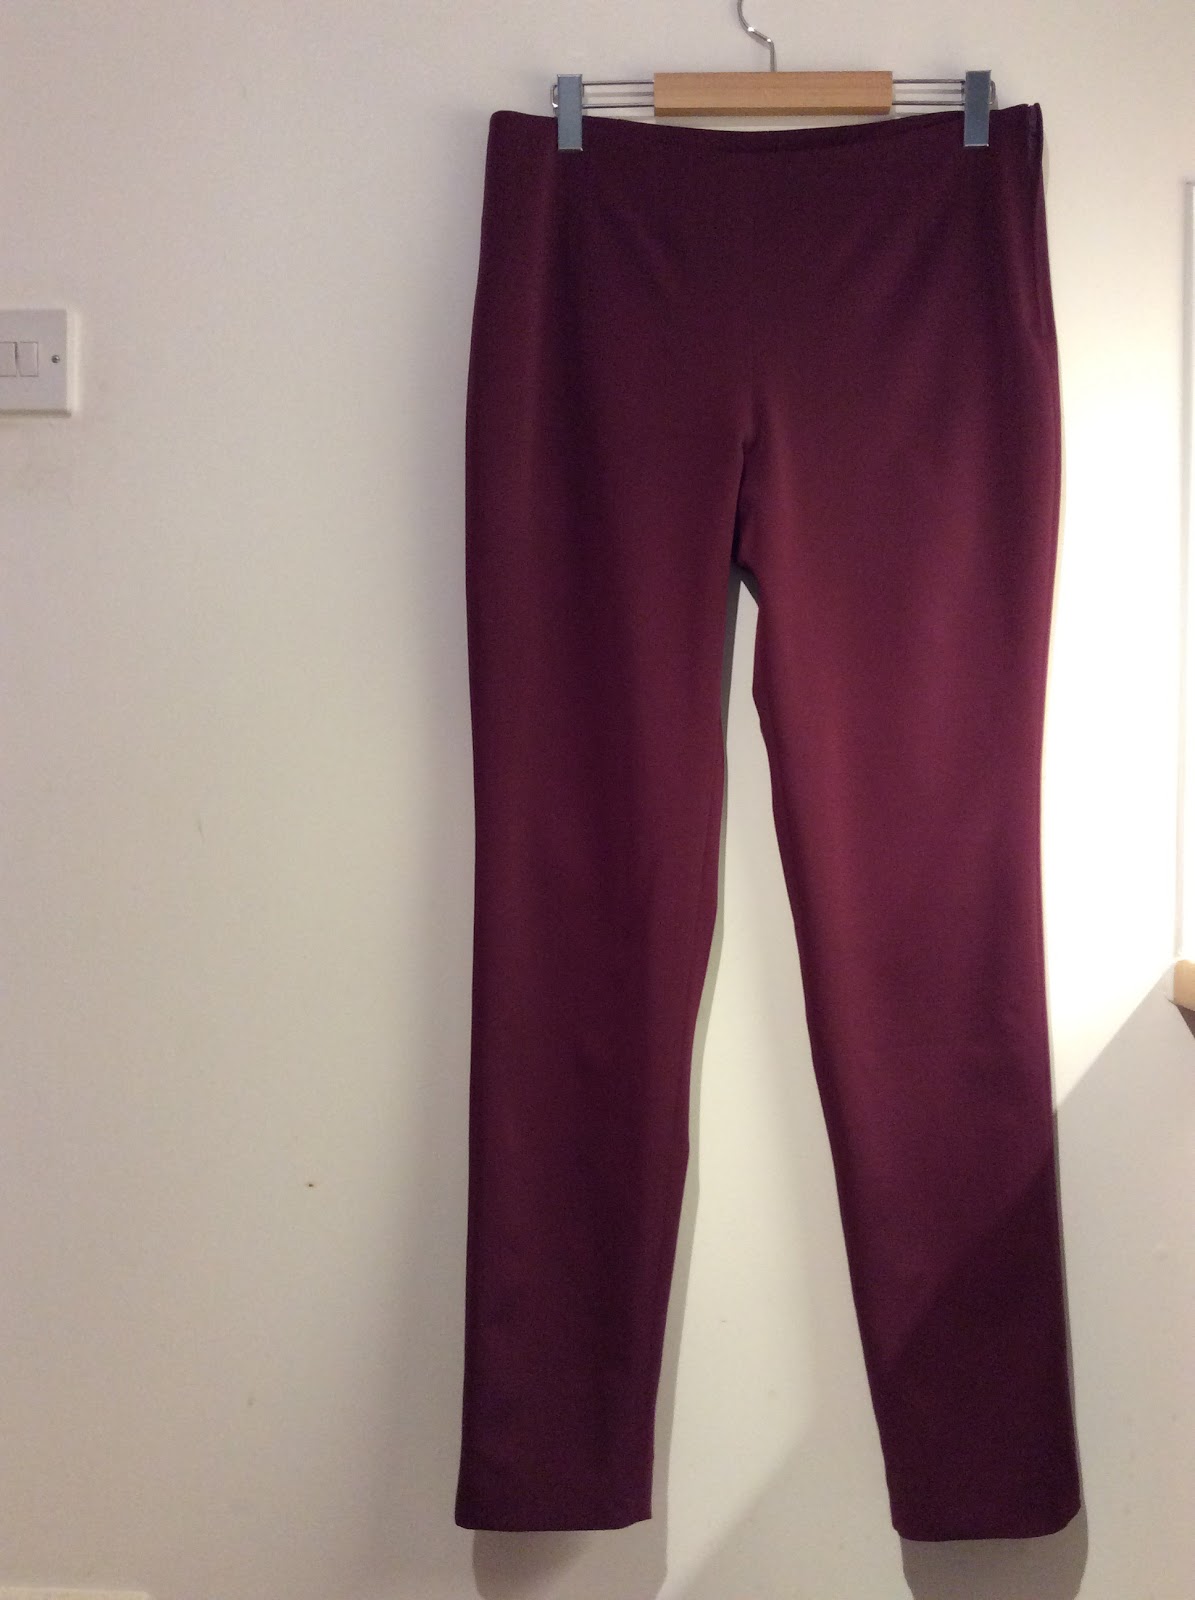 The story sew far...: Merlot Ultimate trousers